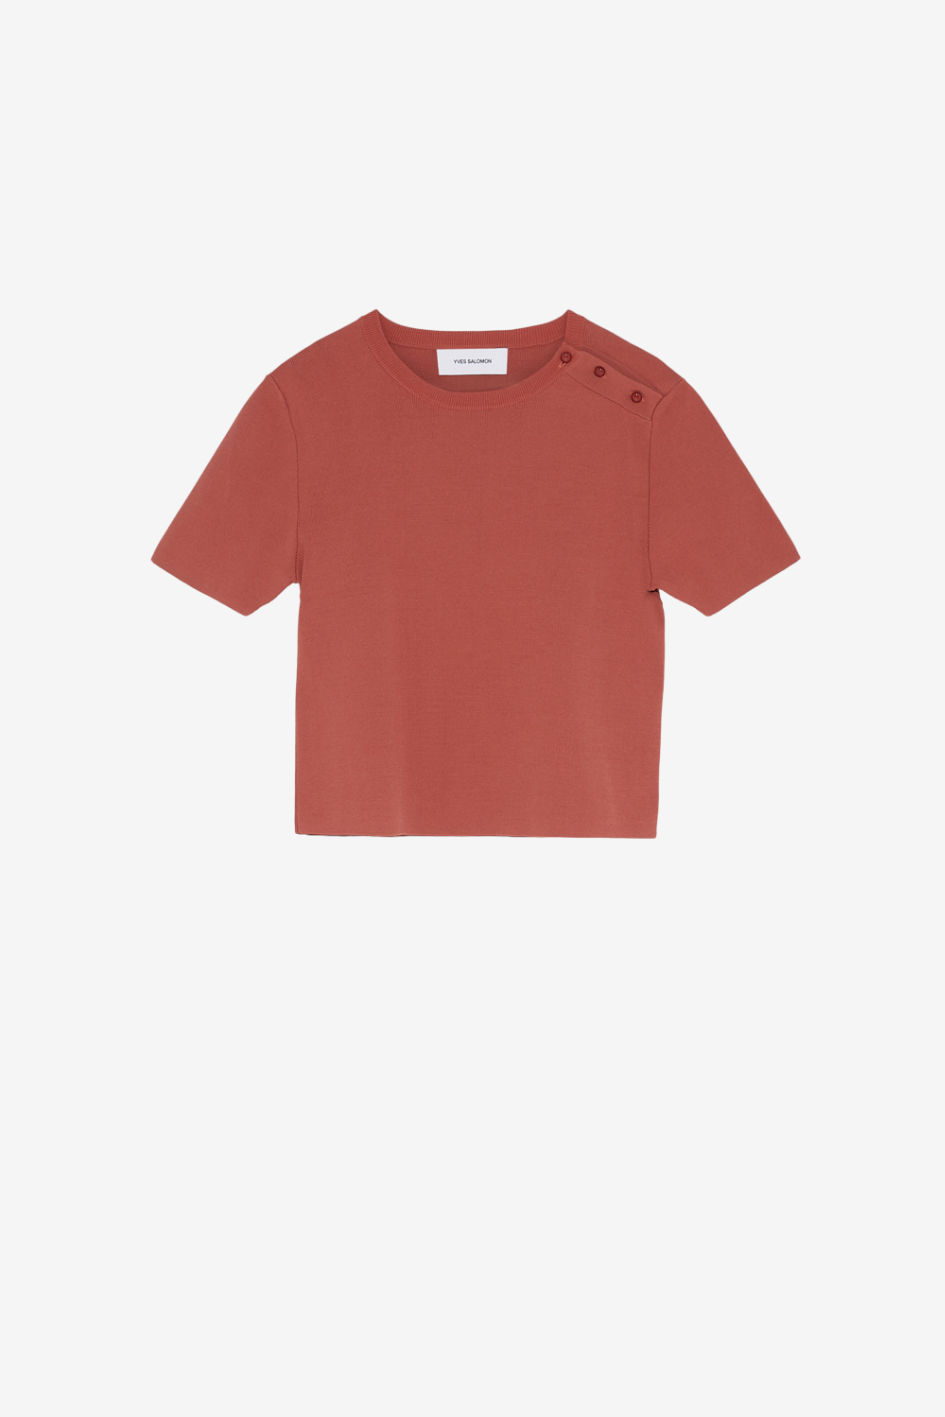 T-Shirt round Neck with Buttons